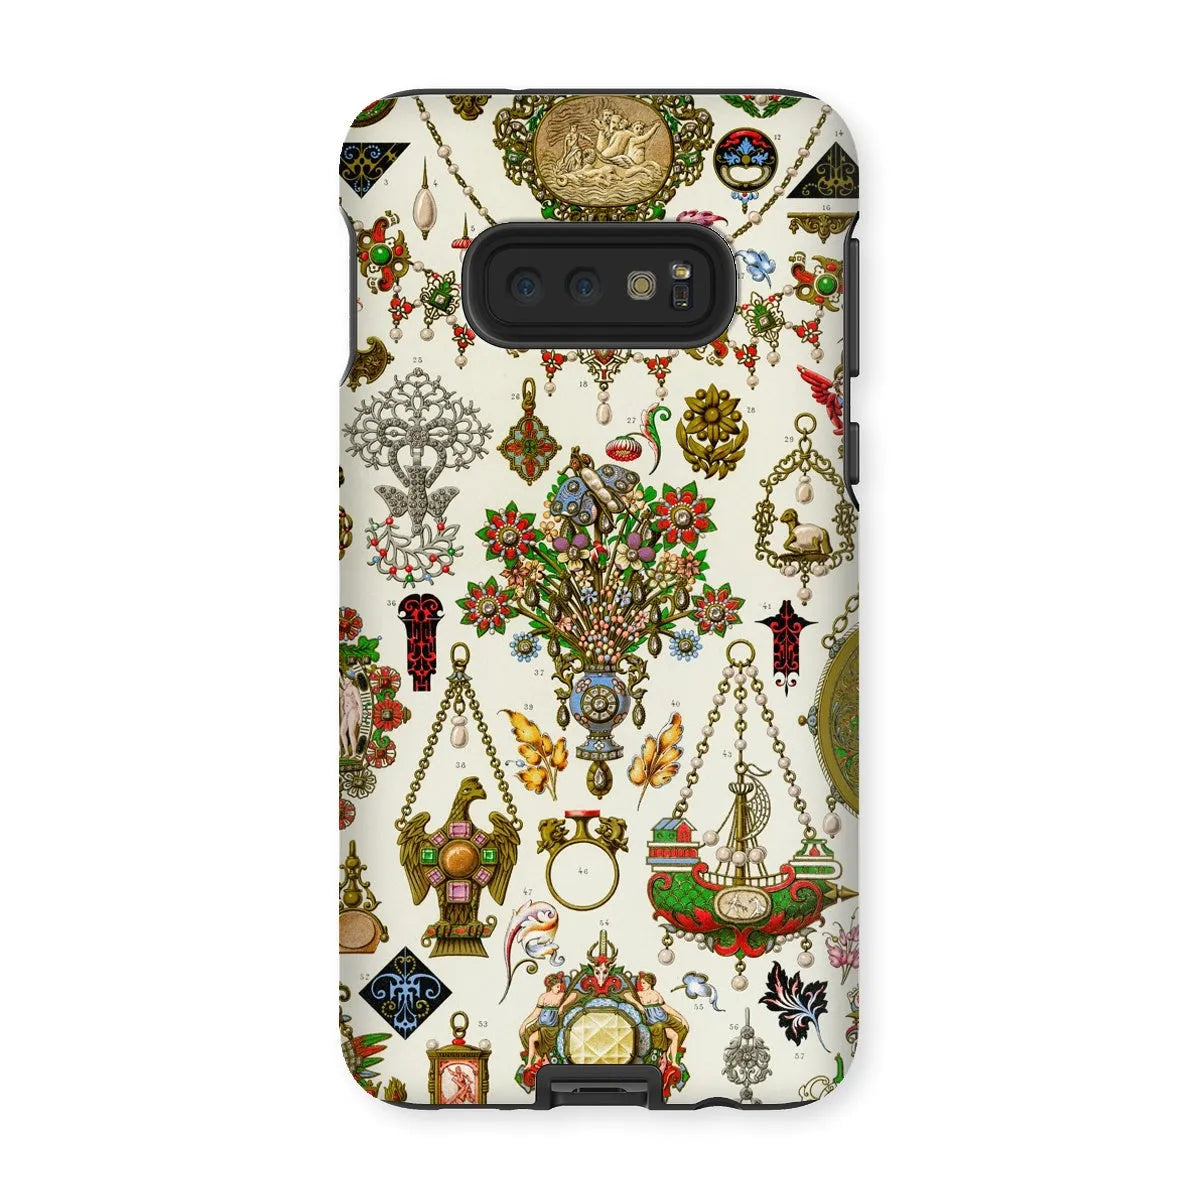 French Jewelry By Auguste Racinet Tough Phone Case - Samsung Galaxy S10e / Matte - Mobile Phone Cases - Aesthetic Art